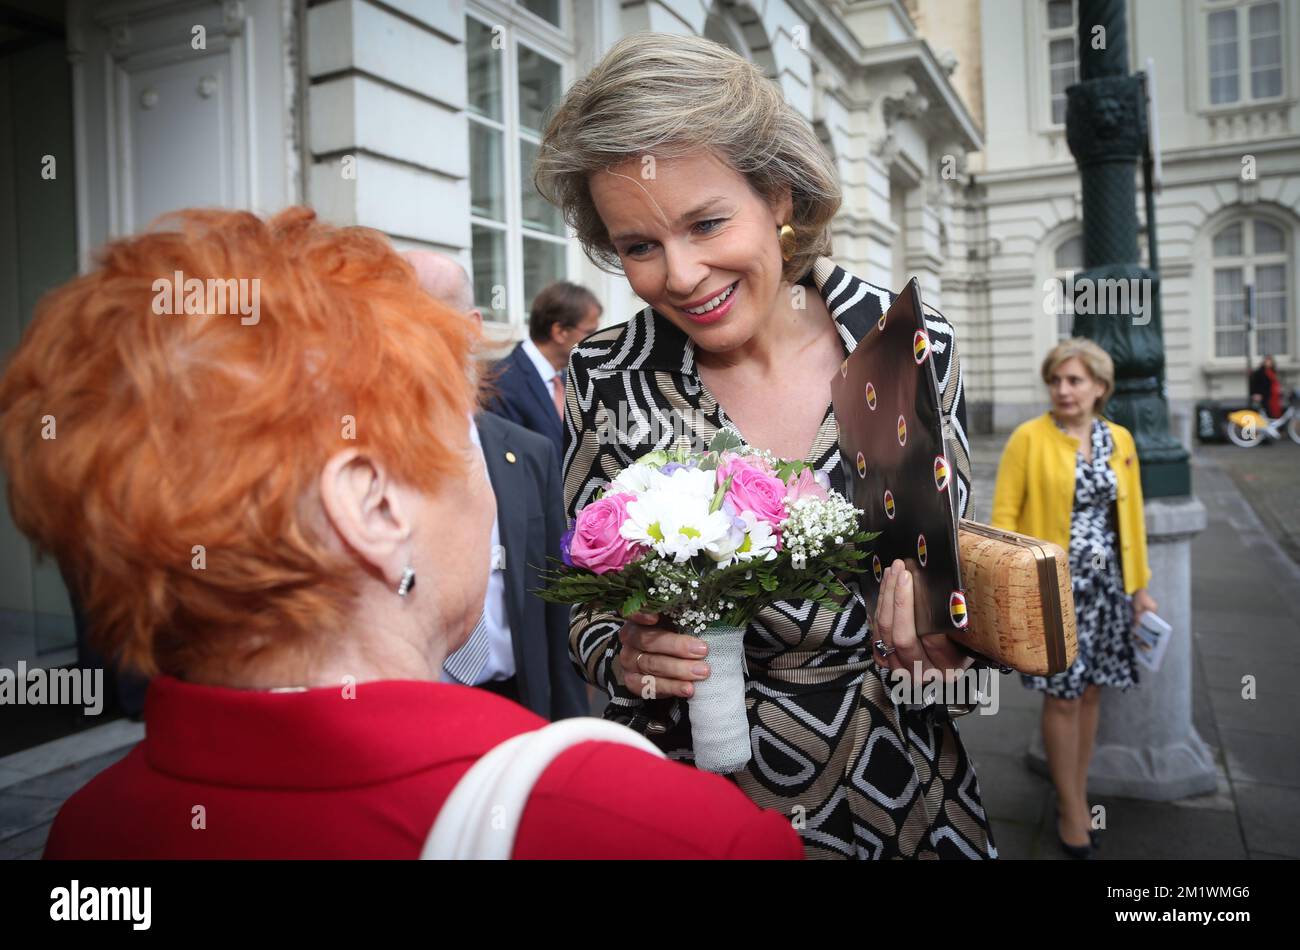 20141016 - BRUSSELS, BELGIUM: Queen Mathilde of Belgium receives flowers of royalty fan Mrs Huguette Huart after a royal visit to the 'The Power of Object(s) ¿ø Design Bestsellers in Belgium' exposition on contemporary Belgian designers, Thursday 16 October 2014 in Brussels. BELGA PHOTO VIRGINIE LEFOUR Stock Photo